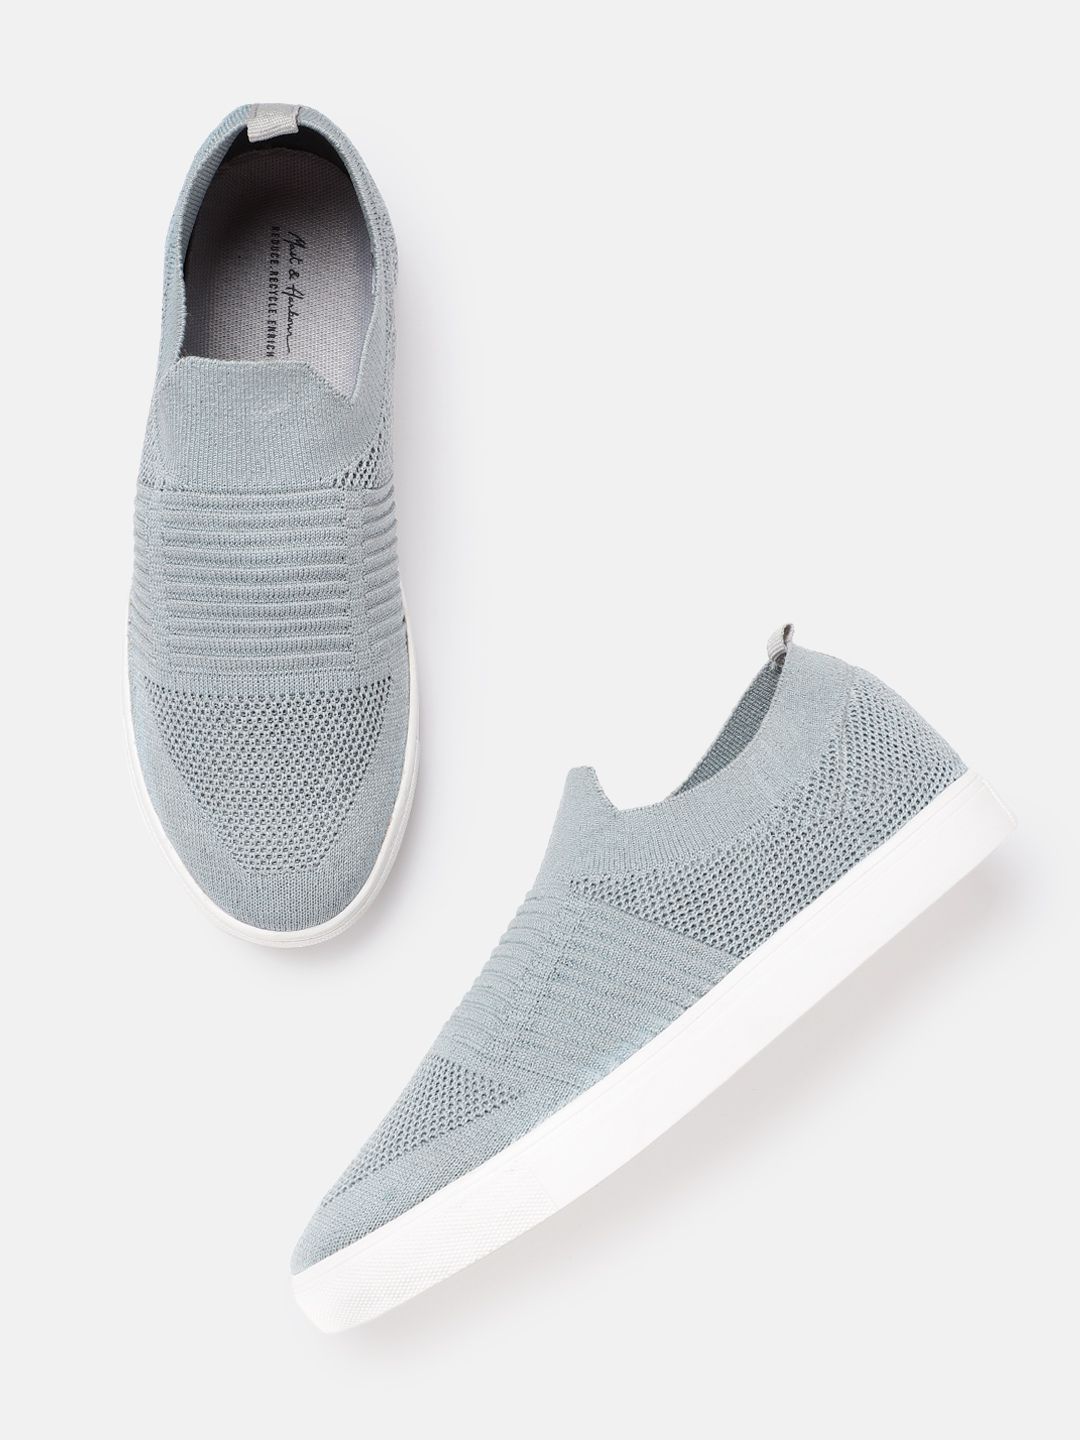 Mast & Harbour Women Grey Woven Design Sustainable Slip-On Sneakers Price in India